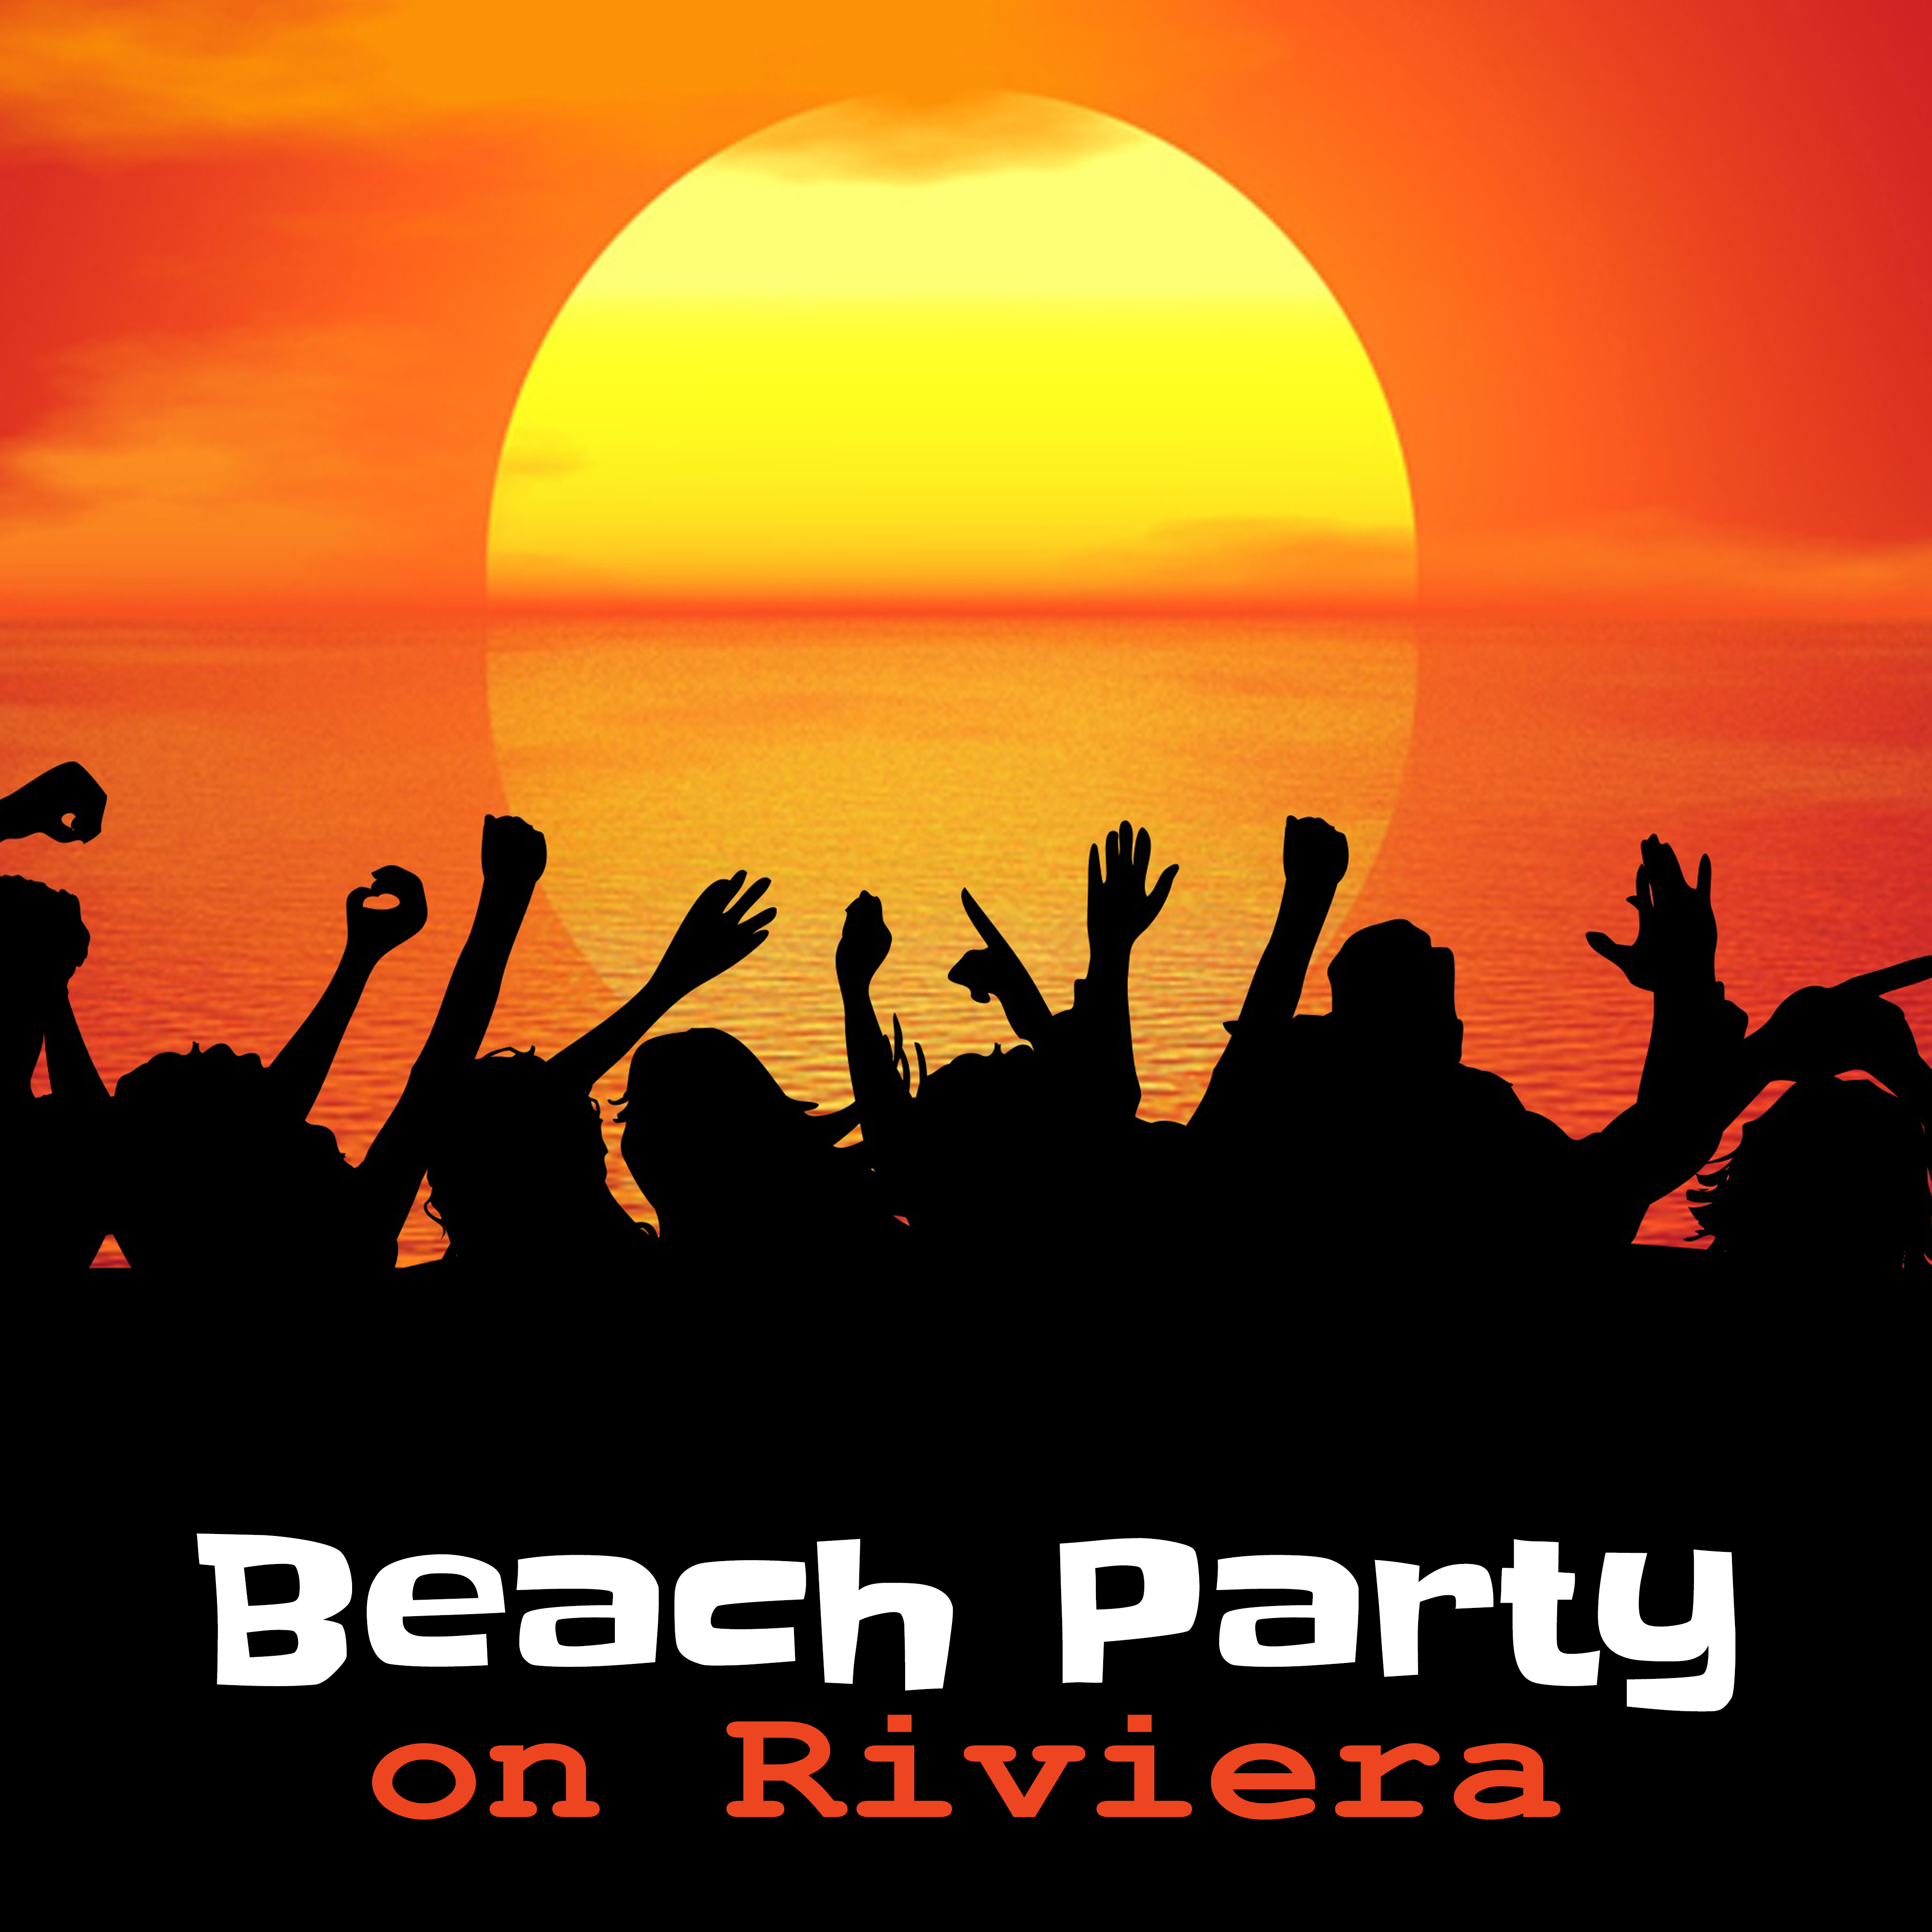 Beach Party on Riviera – Holiday Chill Out Music, Cocktails & Drinks Under Palms, Beach Music, Ibiza Dance Party, **** Vibes, Summer Chill